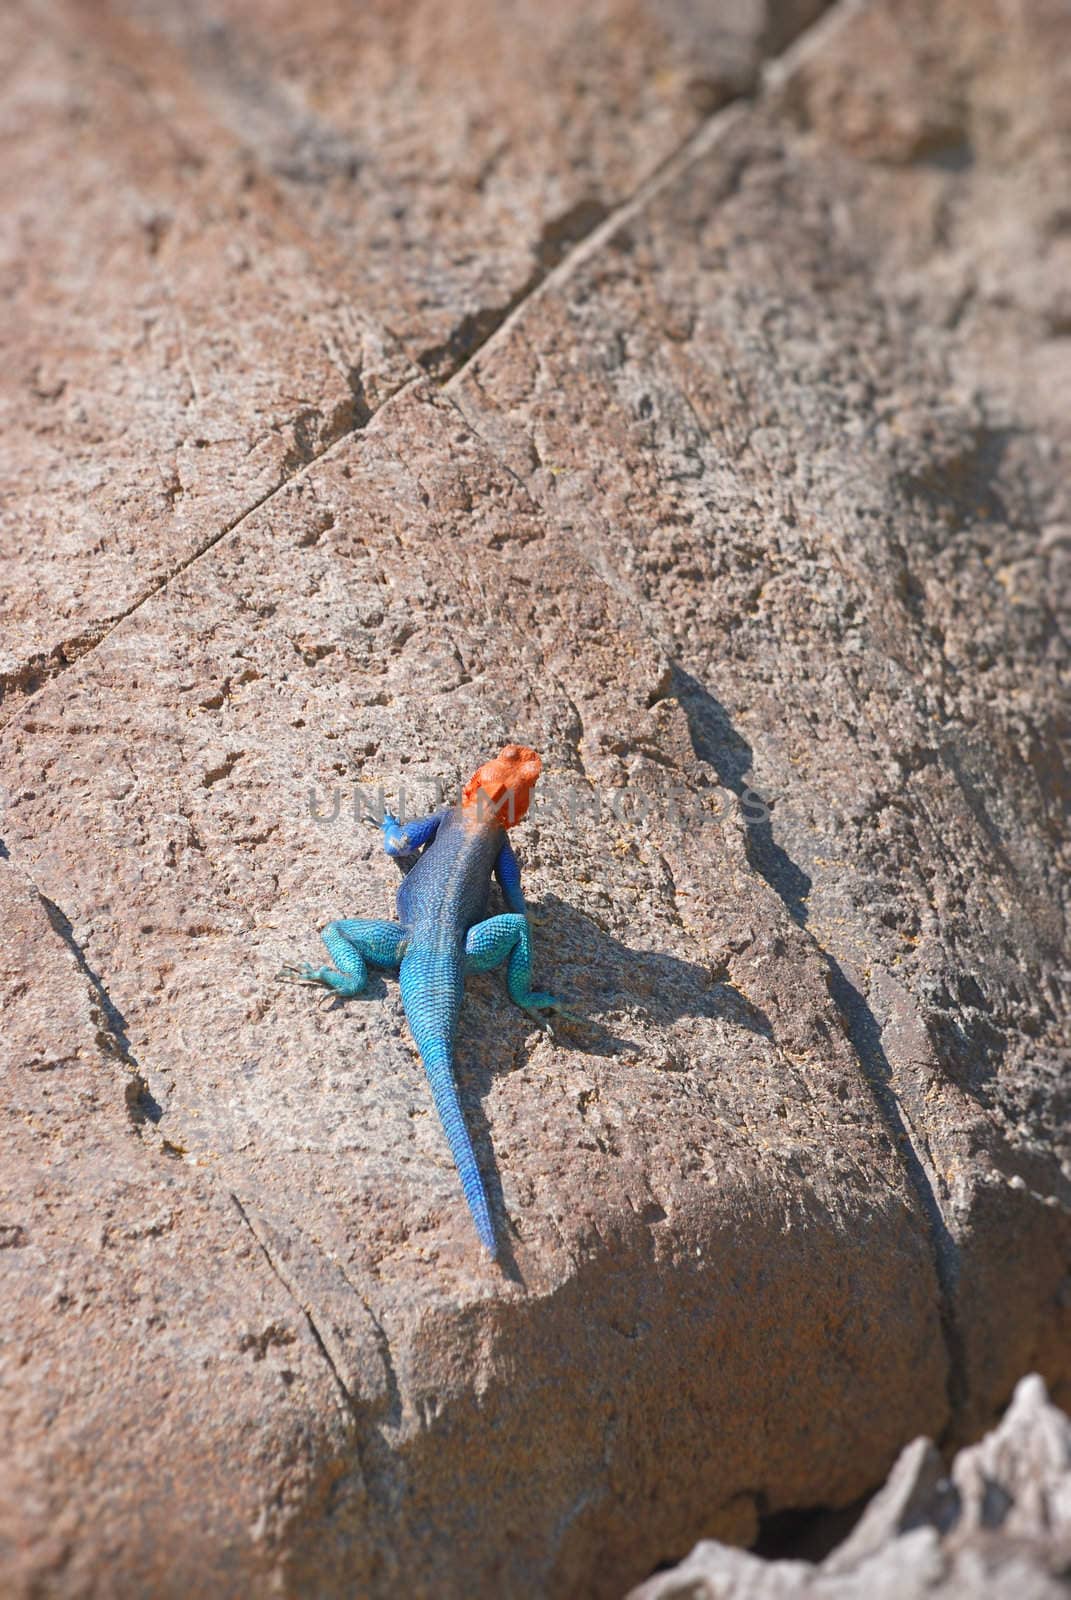 Red-headed rock agama by whitechild